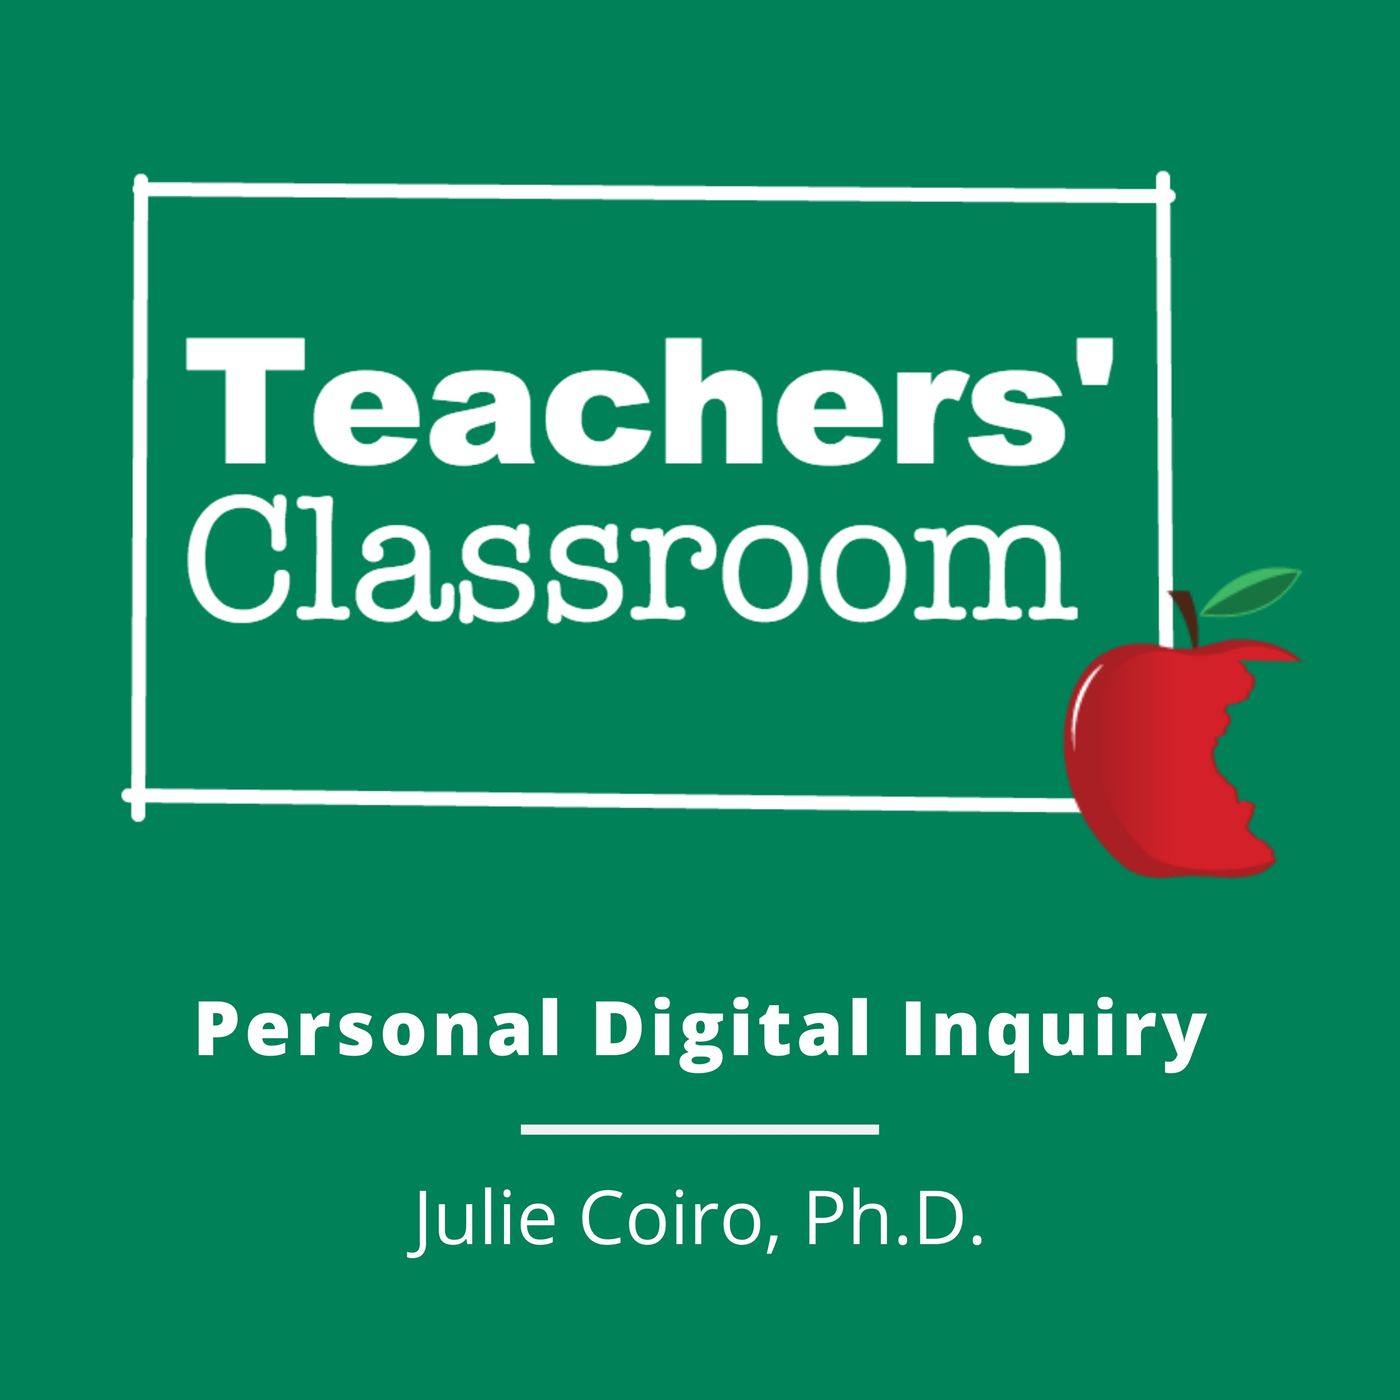 Personal Digital Inquiry with Julie Coiro, Ph.D.